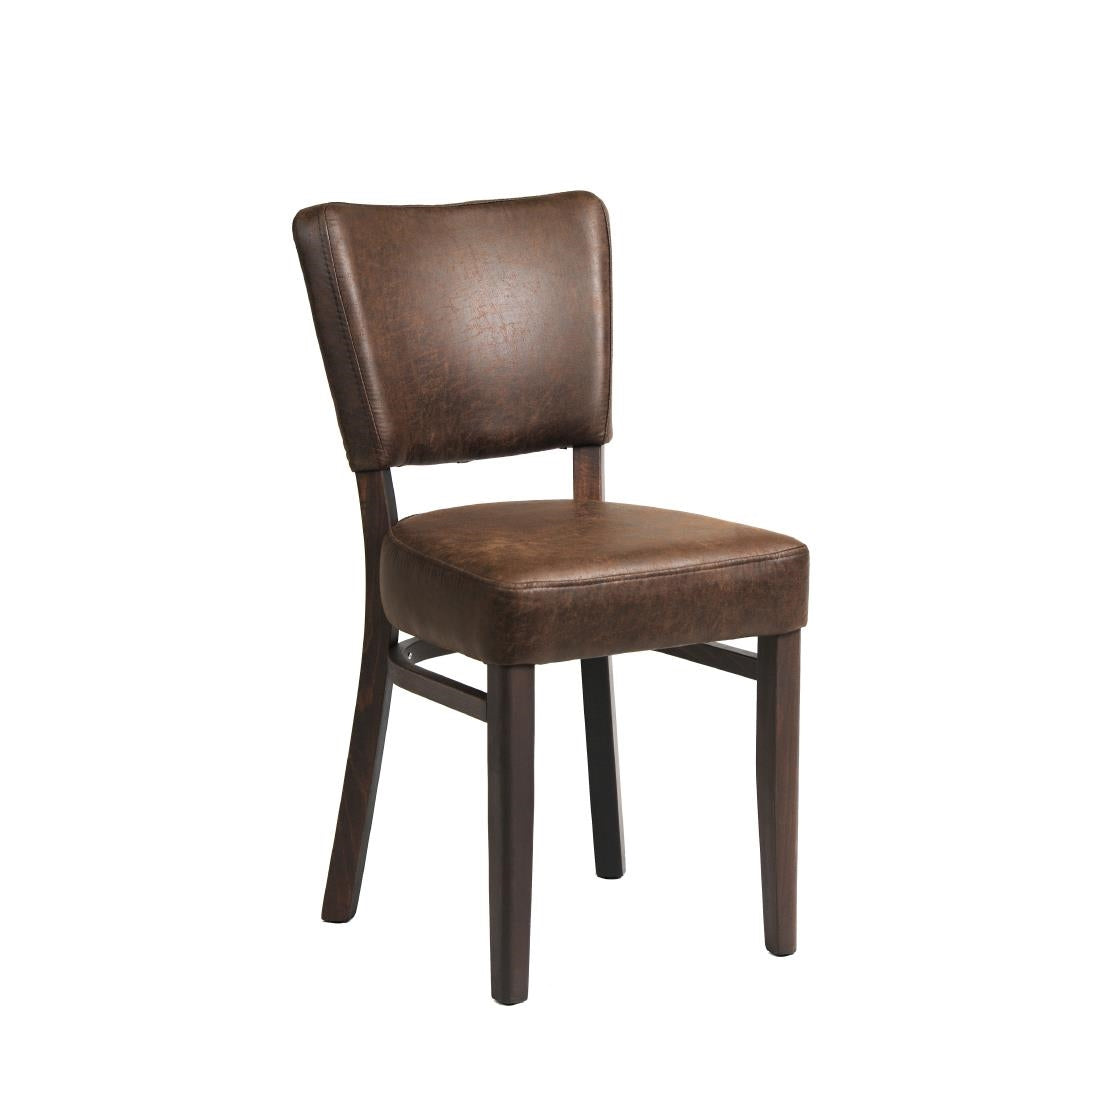 CH124 Oregon Wenge Wood and Faux Leather Dining Chair Espresso (Pack of 2) JD Catering Equipment Solutions Ltd